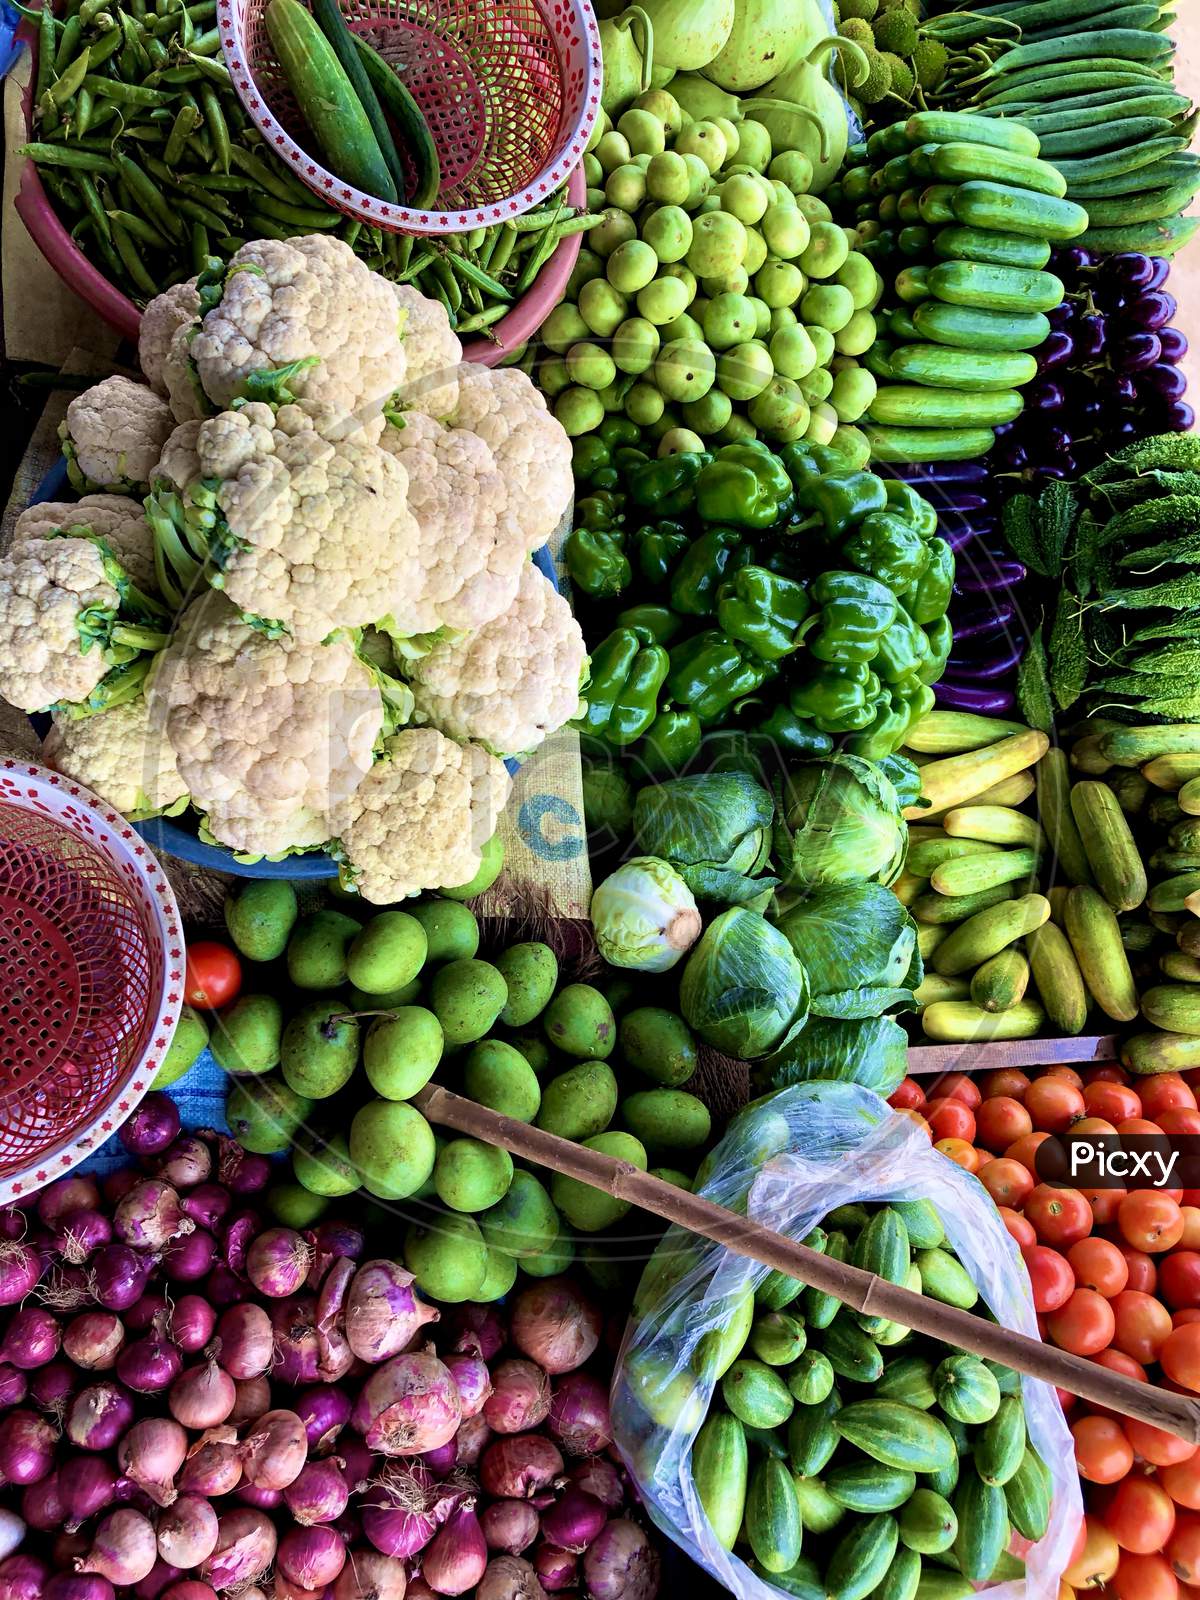 Many types of fruit and vegetables